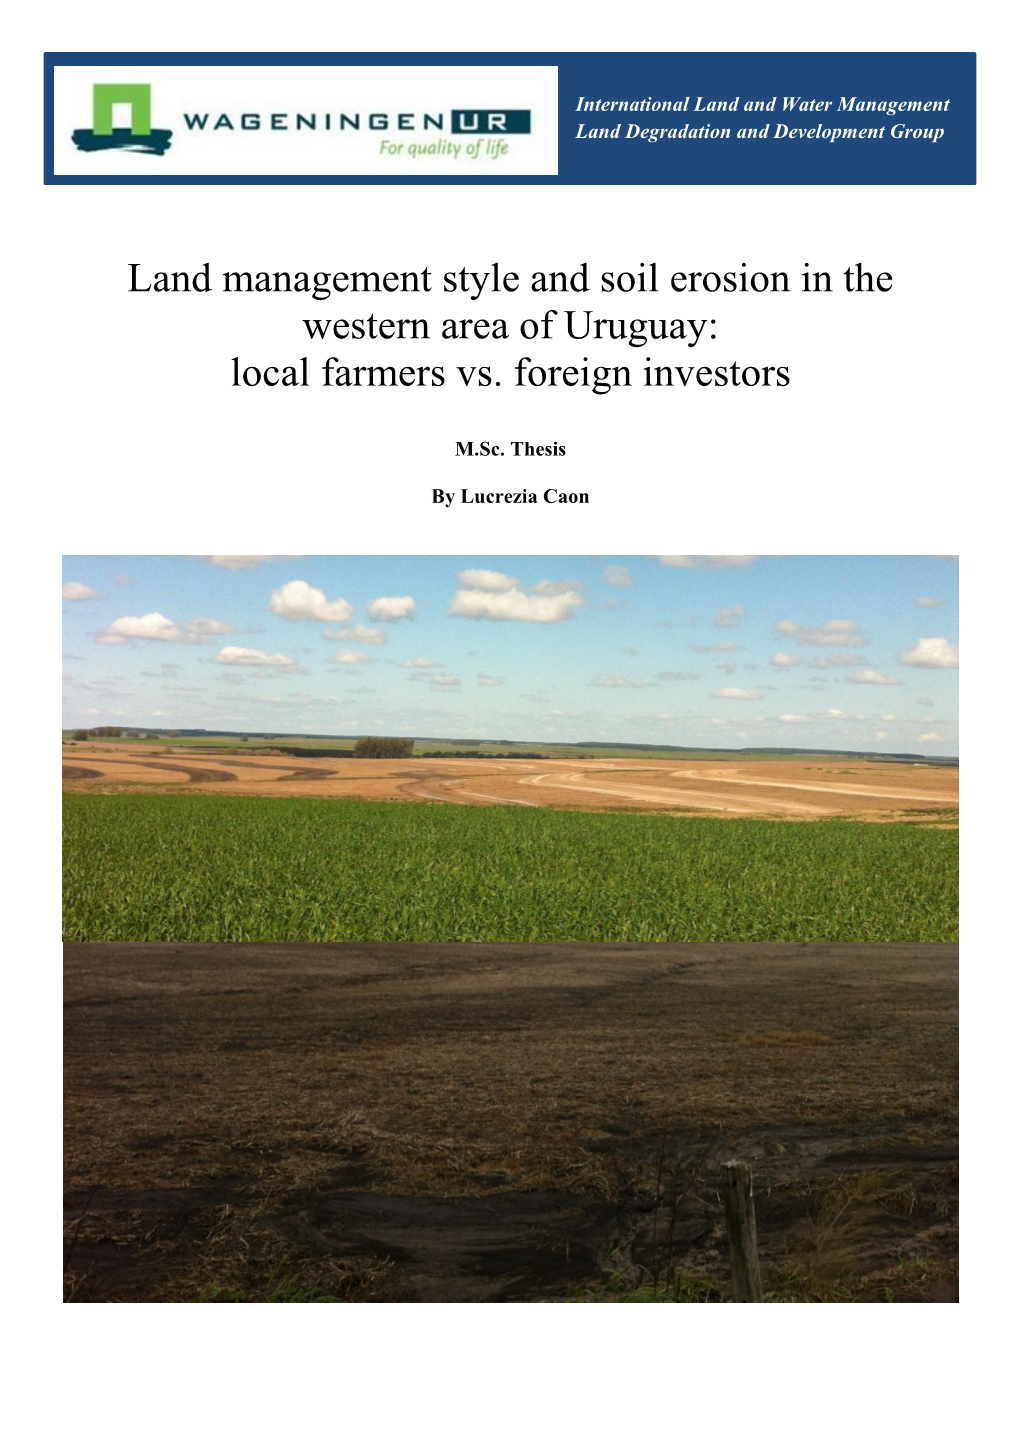 Land Management Style and Soil Erosion in the Western Area of Uruguay: Local Farmers Vs